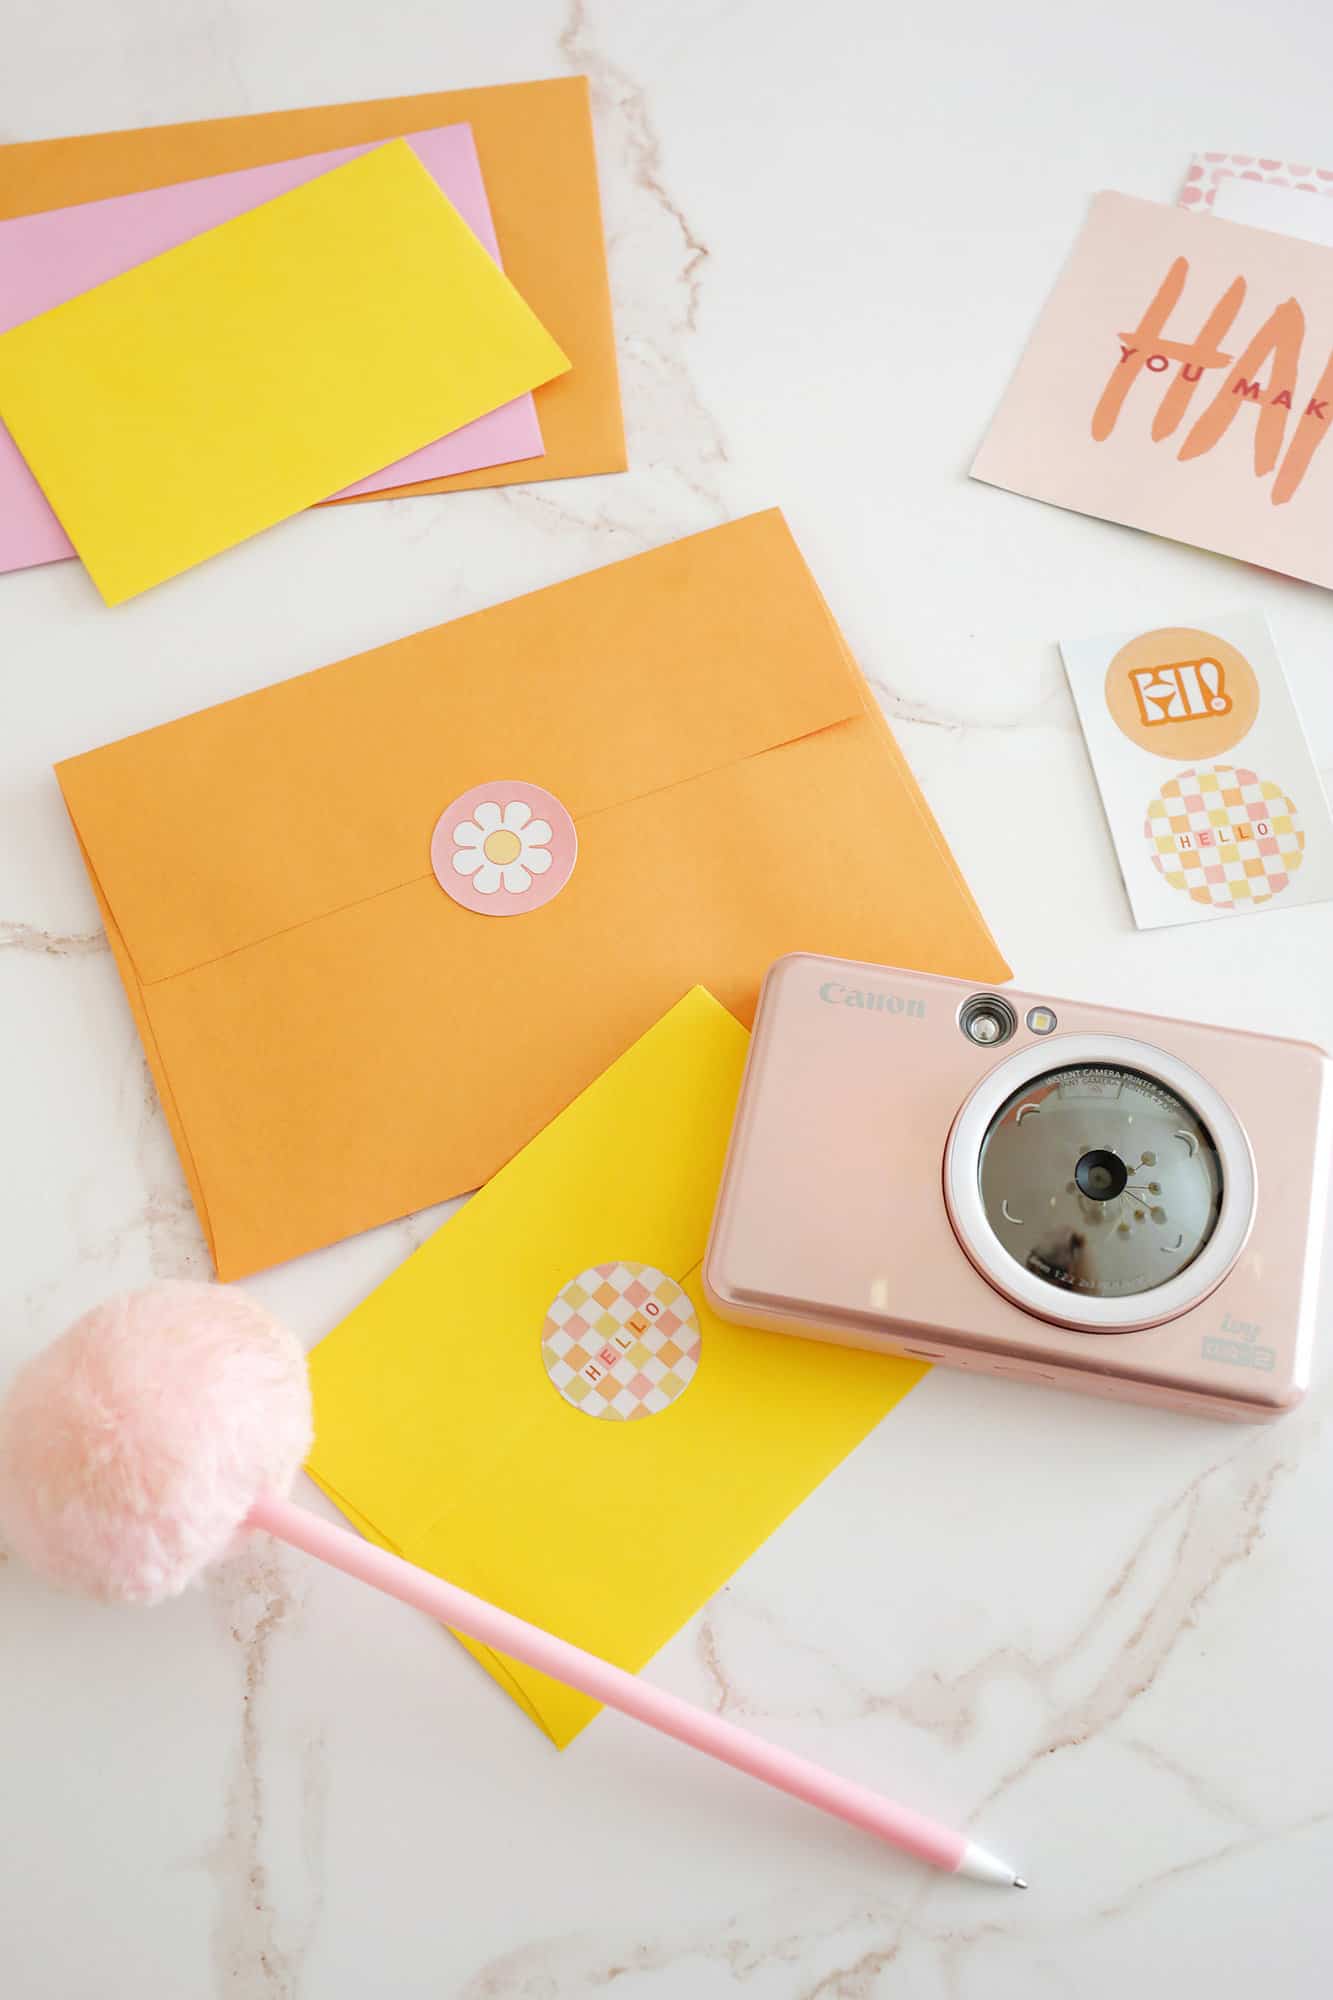 custom mail stickers added to colorful envelopes next to an instant camera